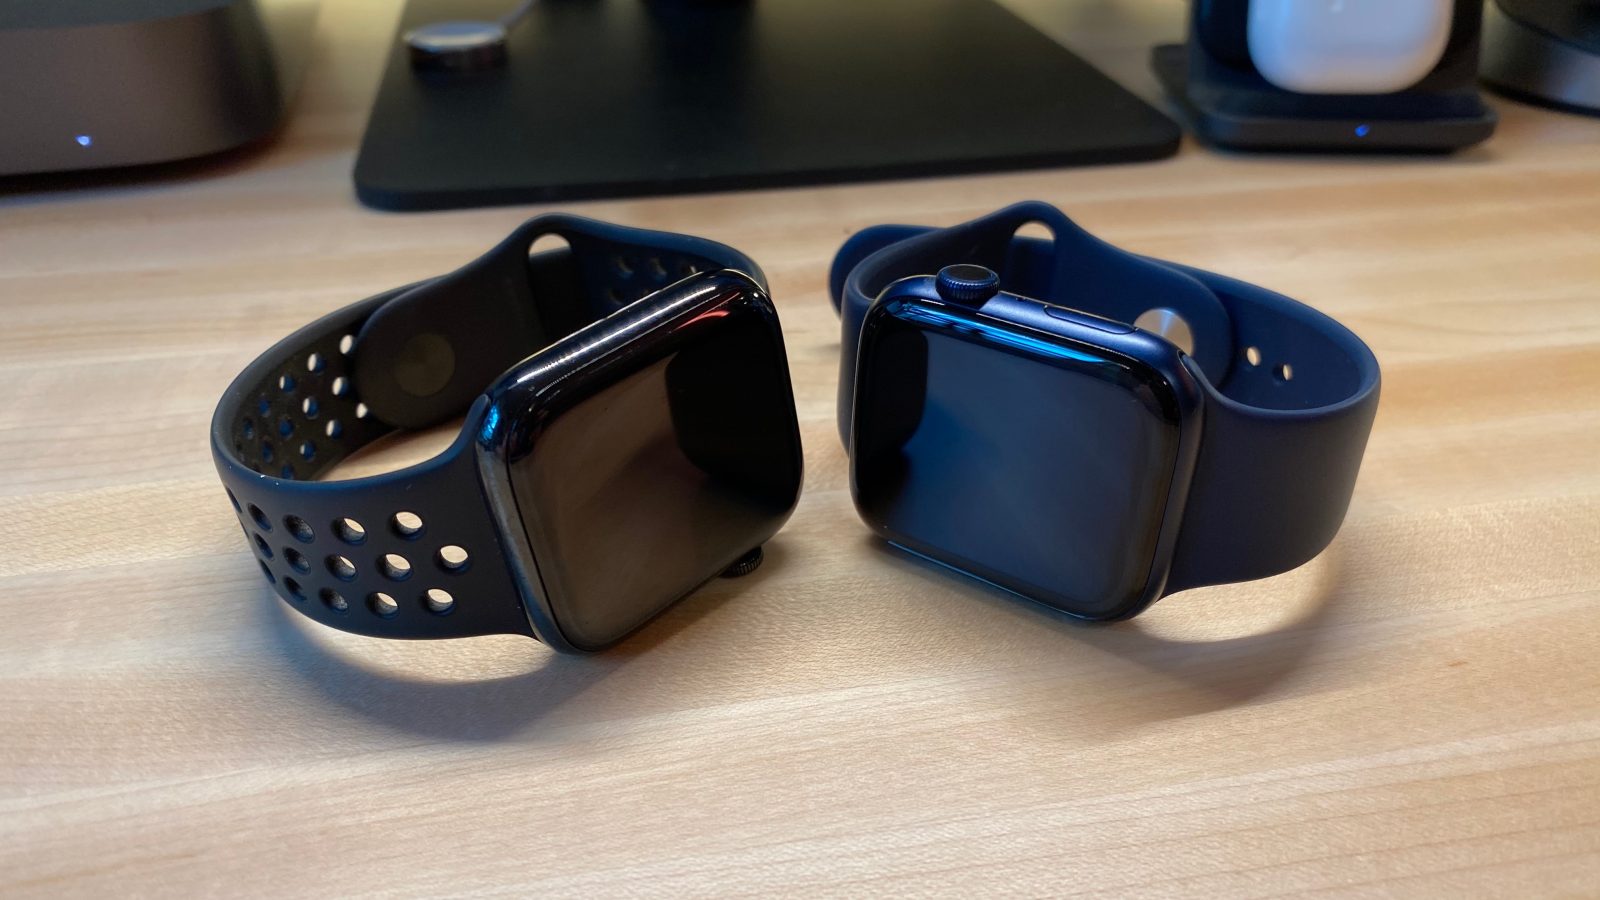 Apple Watch Series 6 Diary: How I'm making my upgrade decision - 9to5Mac